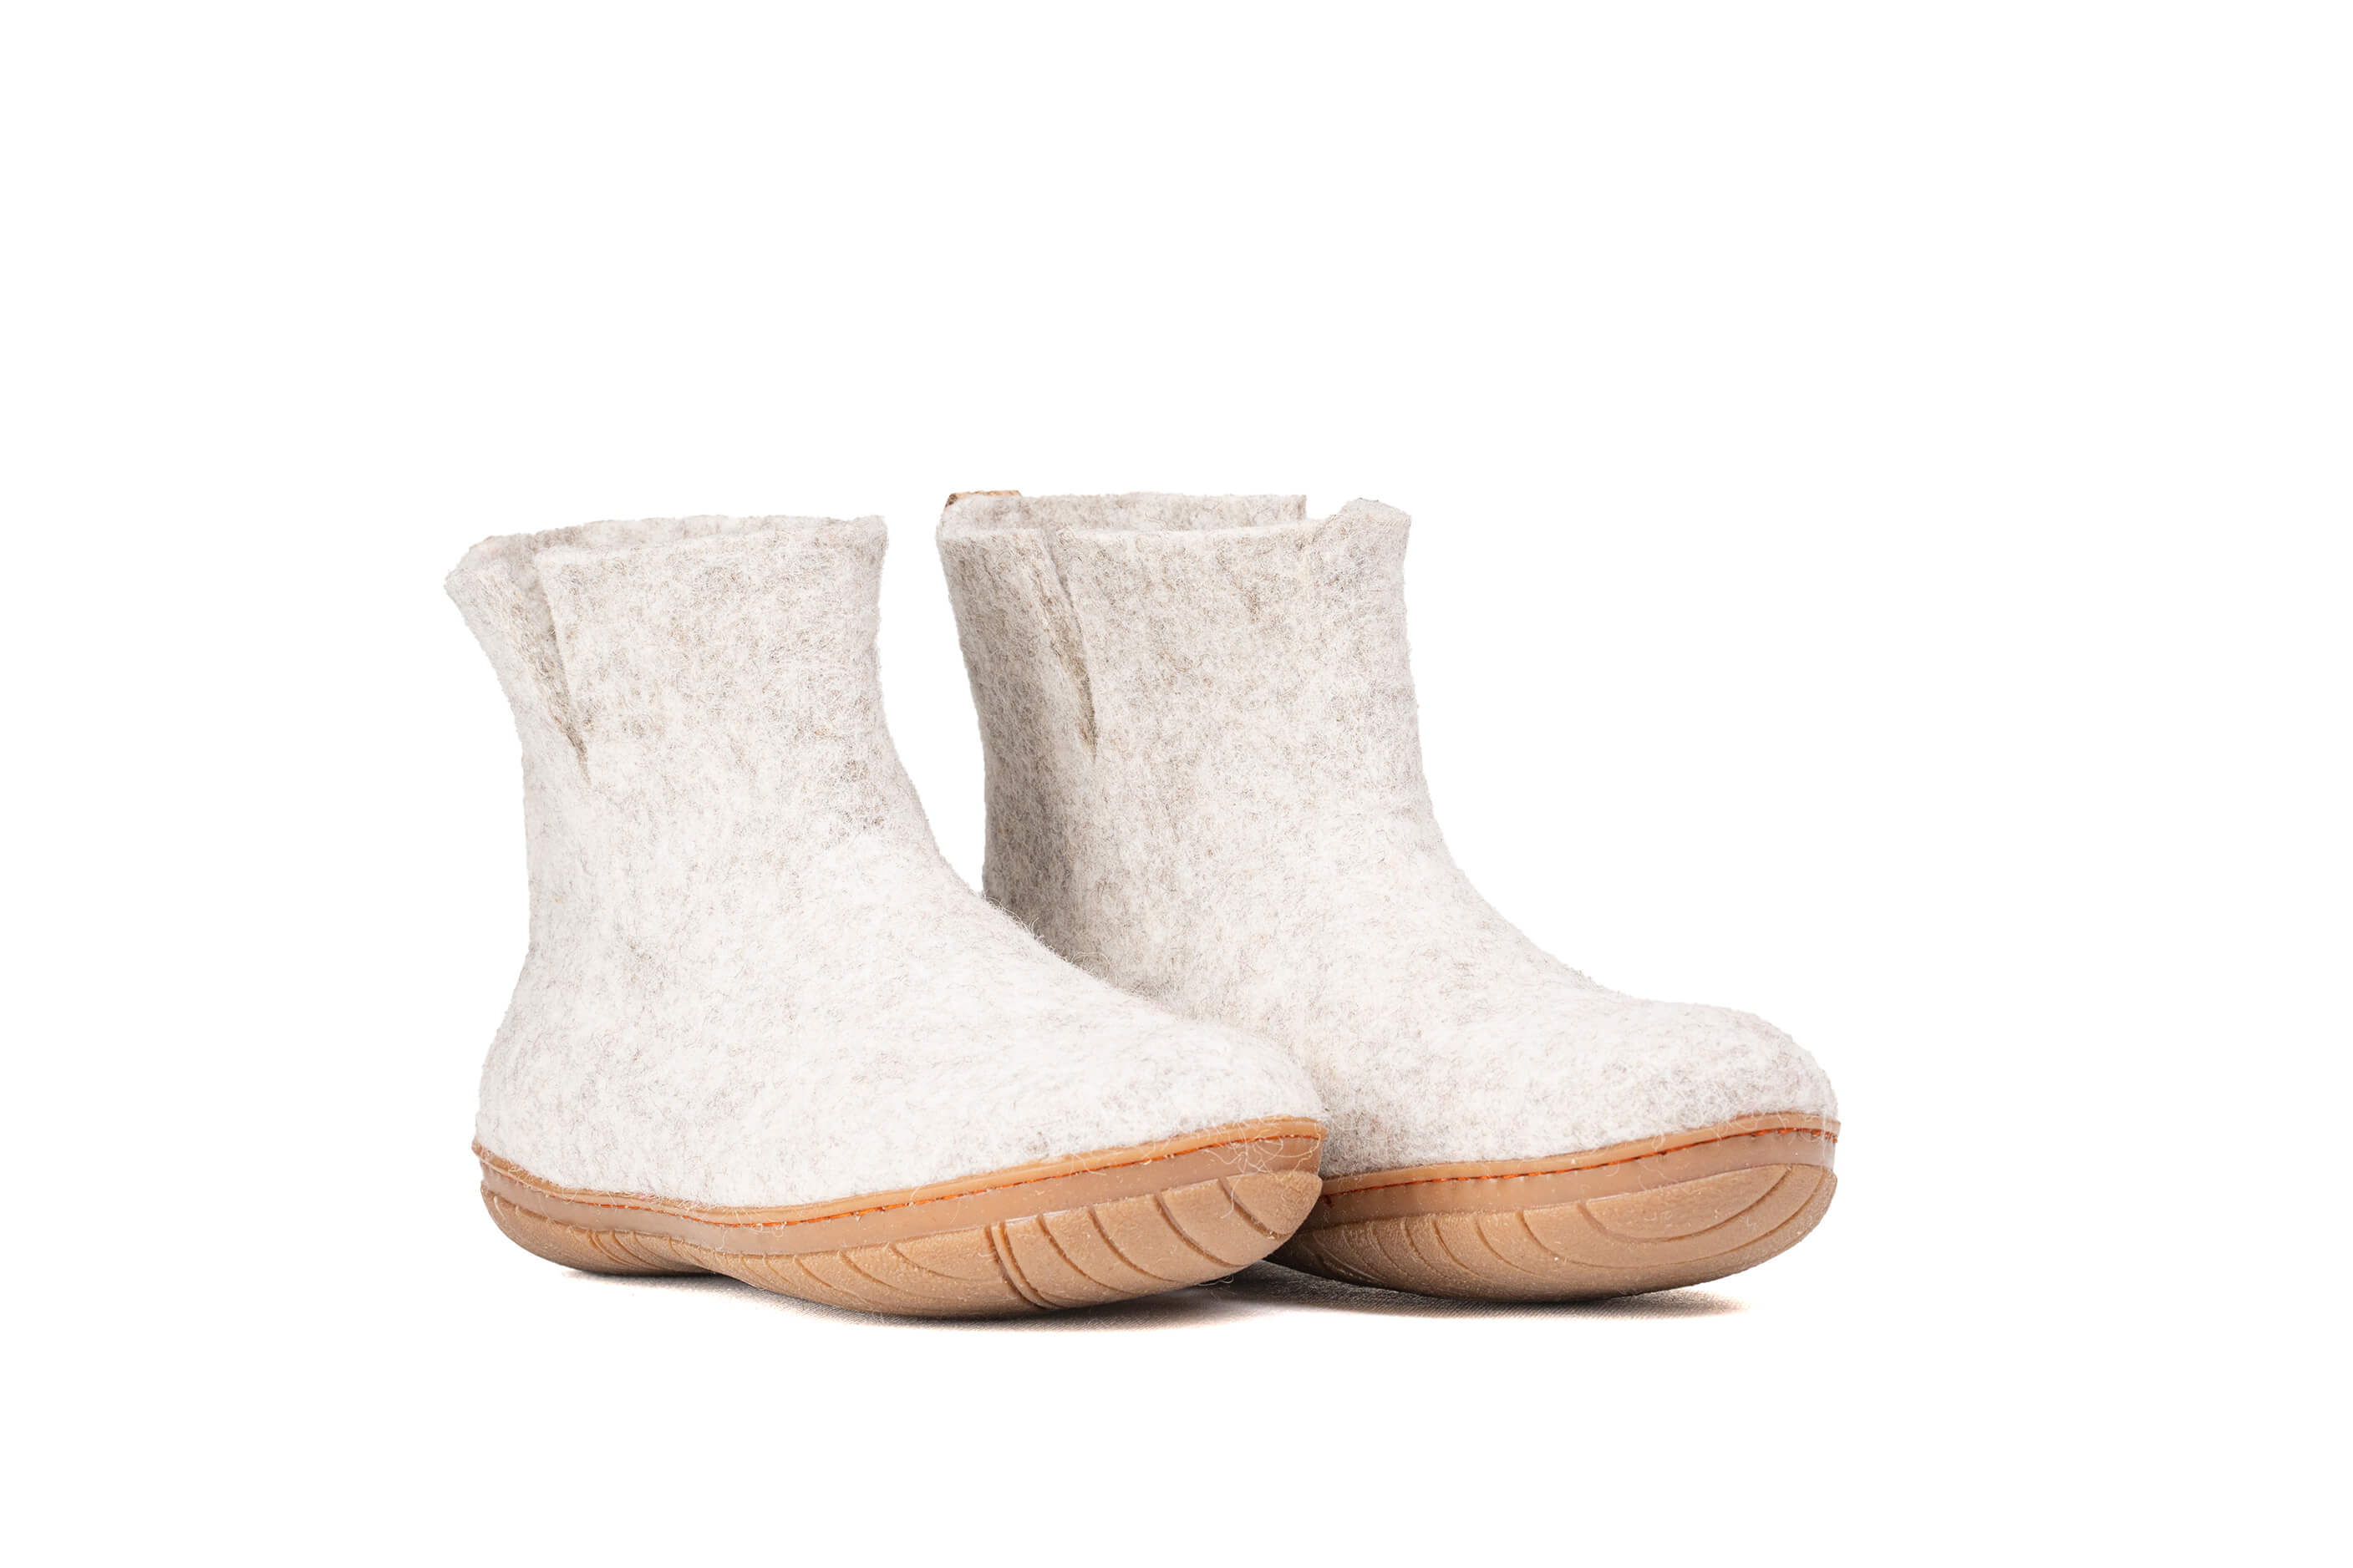 Outdoor Low Boots With Rubber Sole - Light Brown